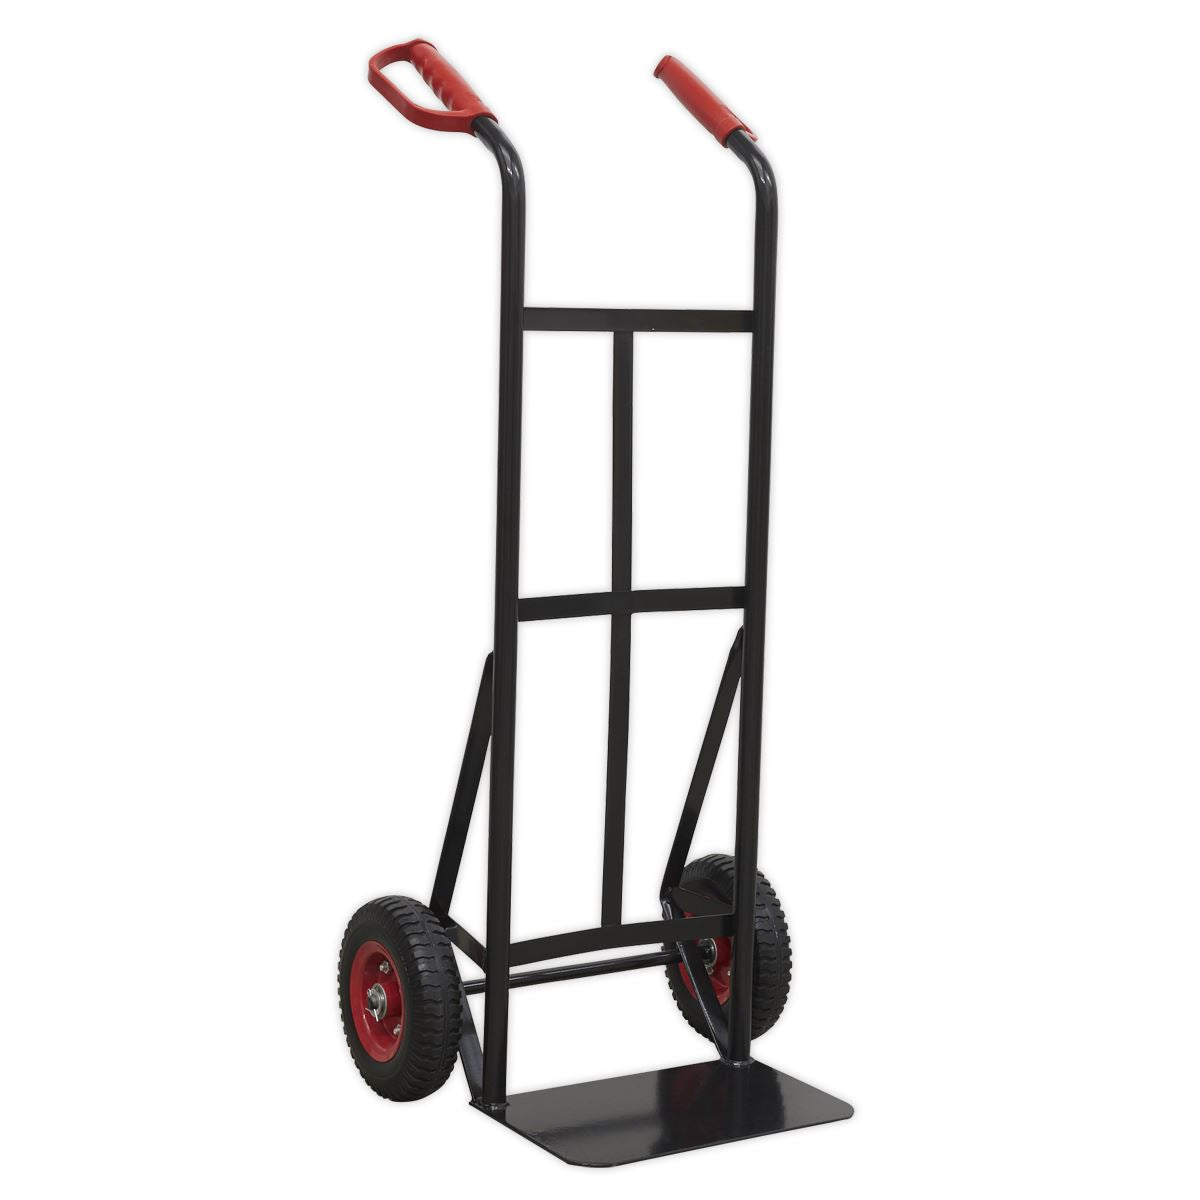 Sealey Premier Heavy-Duty Sack Truck with PU Tyres 200kg Capacity